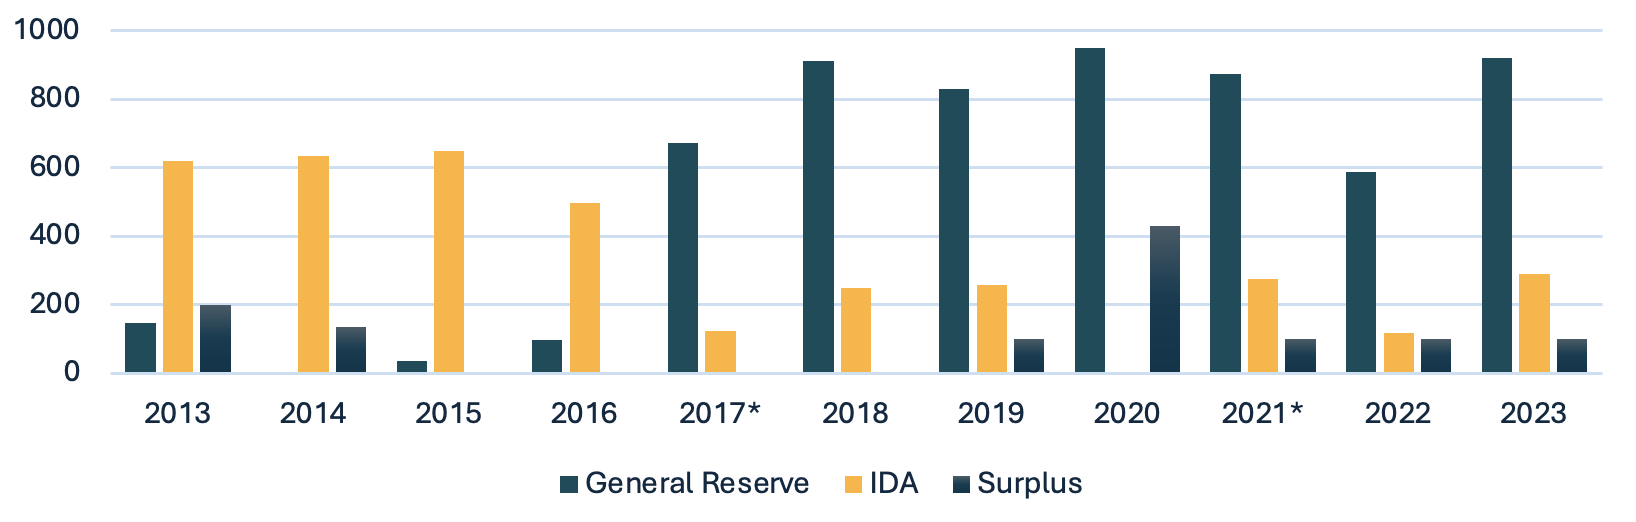 Figure showing that IBRD's income allocation has shifted sharply, starting in 2017, to th general reserve rather than IDA